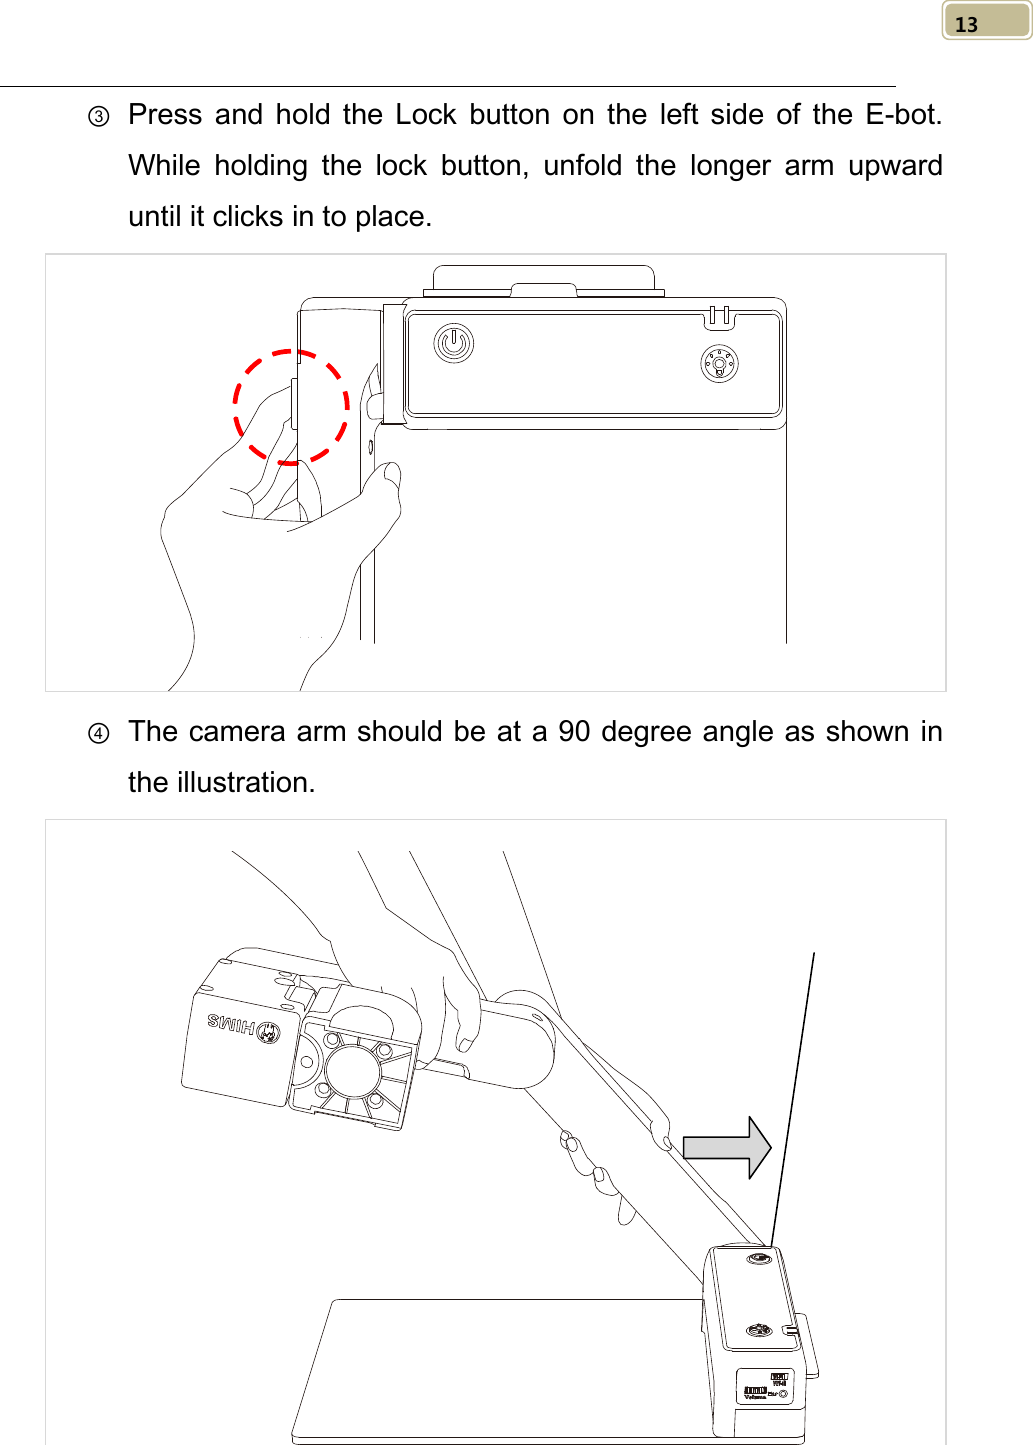   13 ③ Press  and hold the  Lock button on the left side of the E-bot. While holding the lock button, unfold the longer arm upward until it clicks in to place.  ④ The camera arm should be at a 90 degree angle as shown in the illustration.  